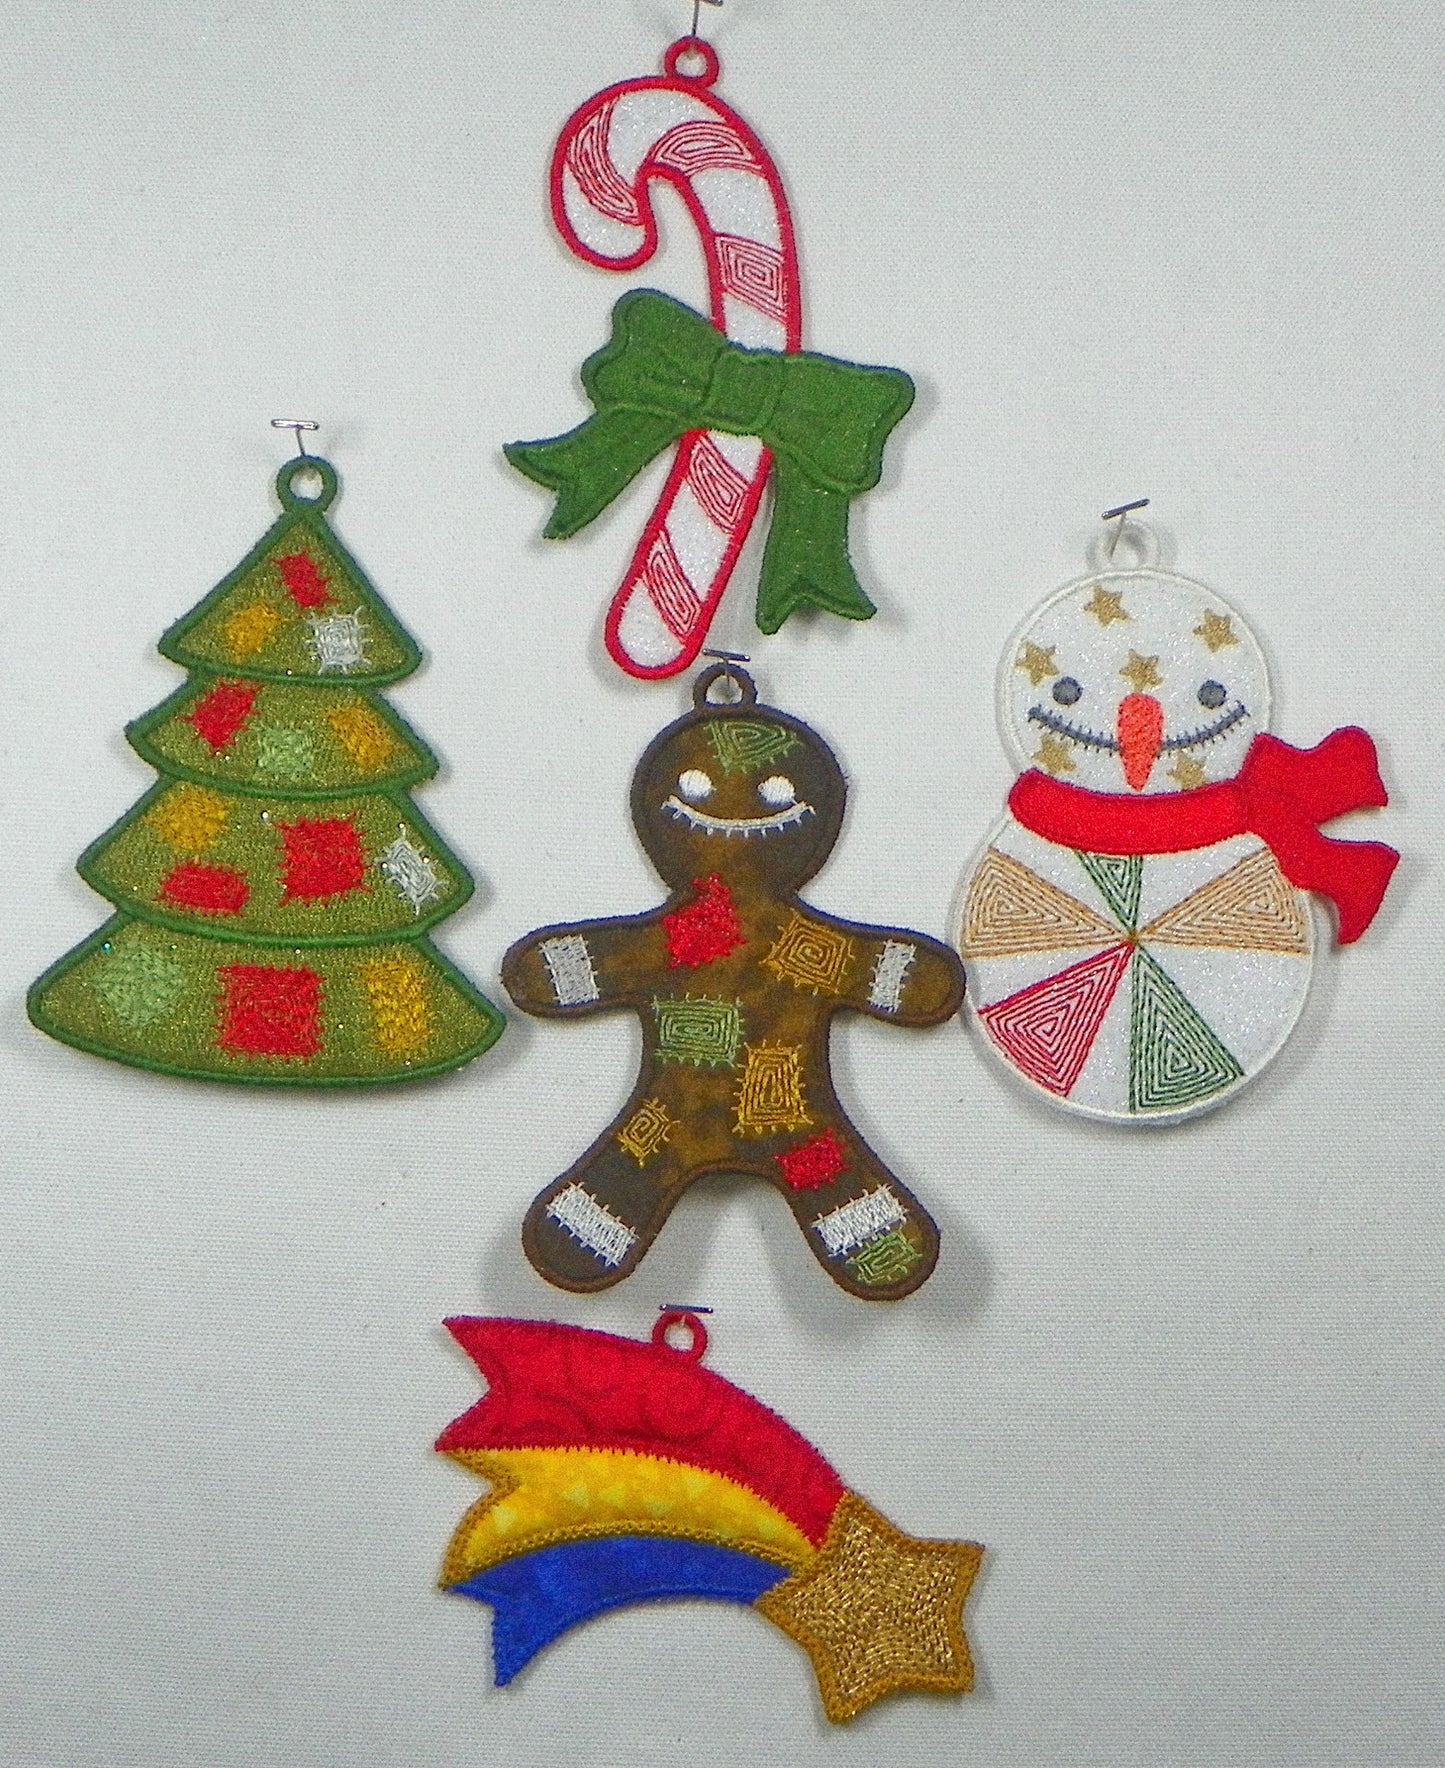 Whimsy Christmas Ornaments [4x4] # 10012